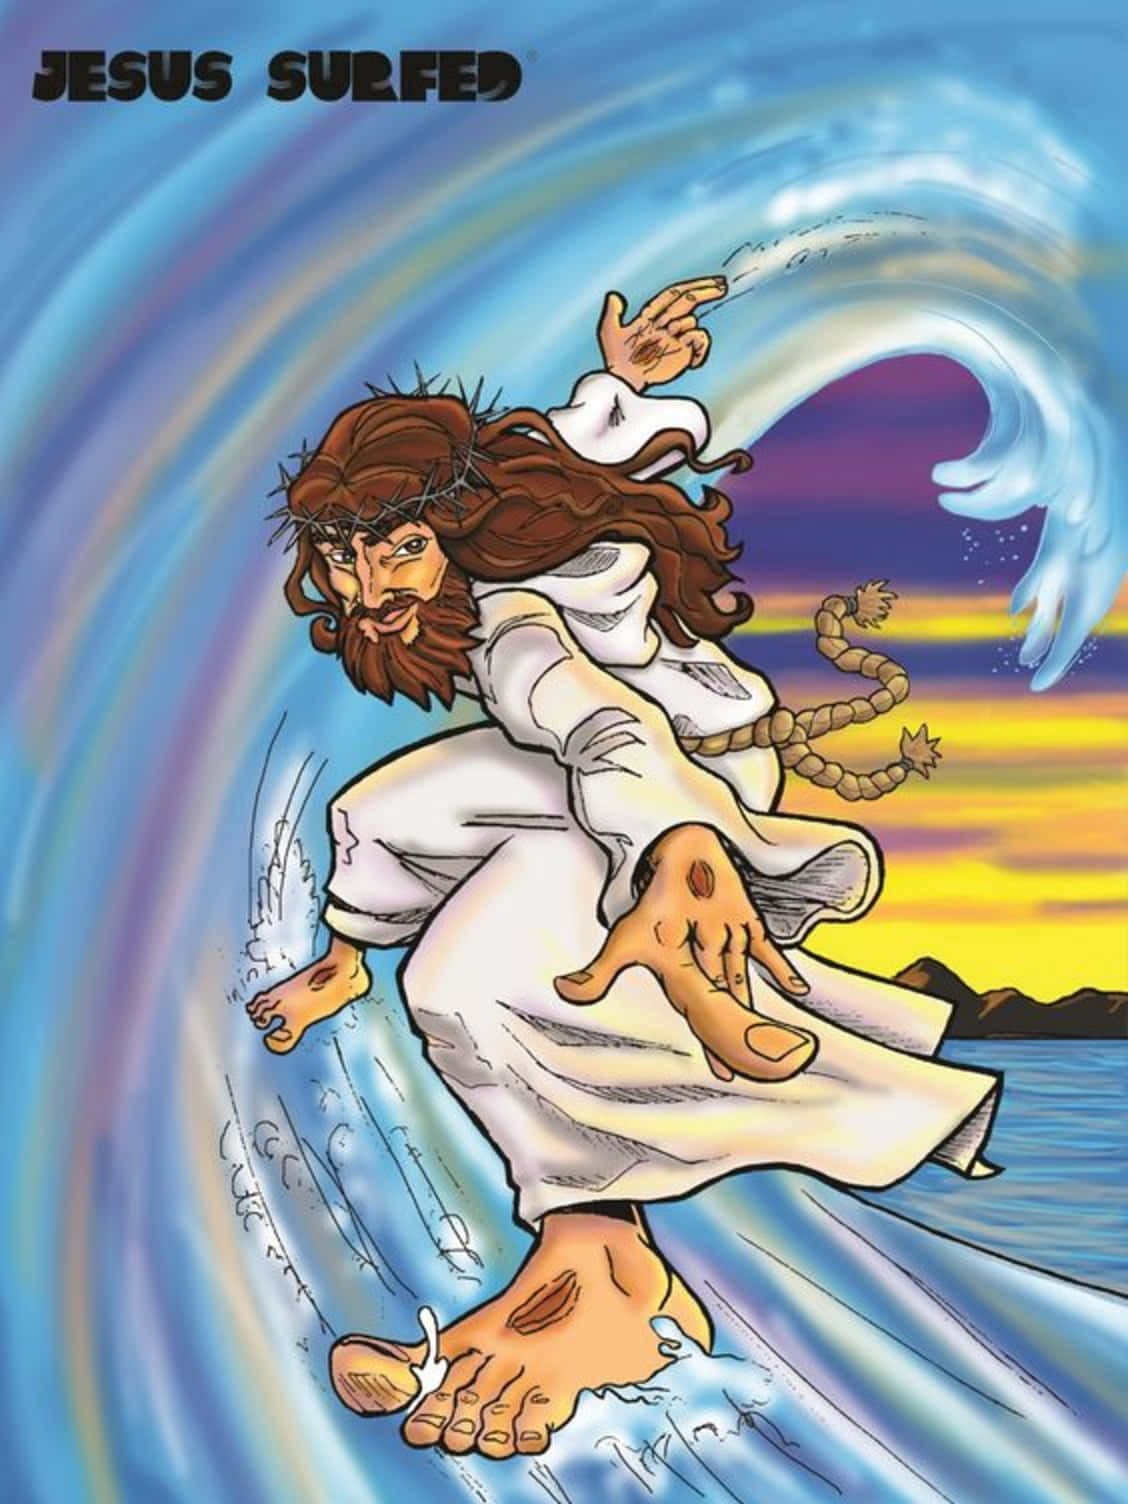 Cool Jesus Uses His Superpowers For Good Wallpaper